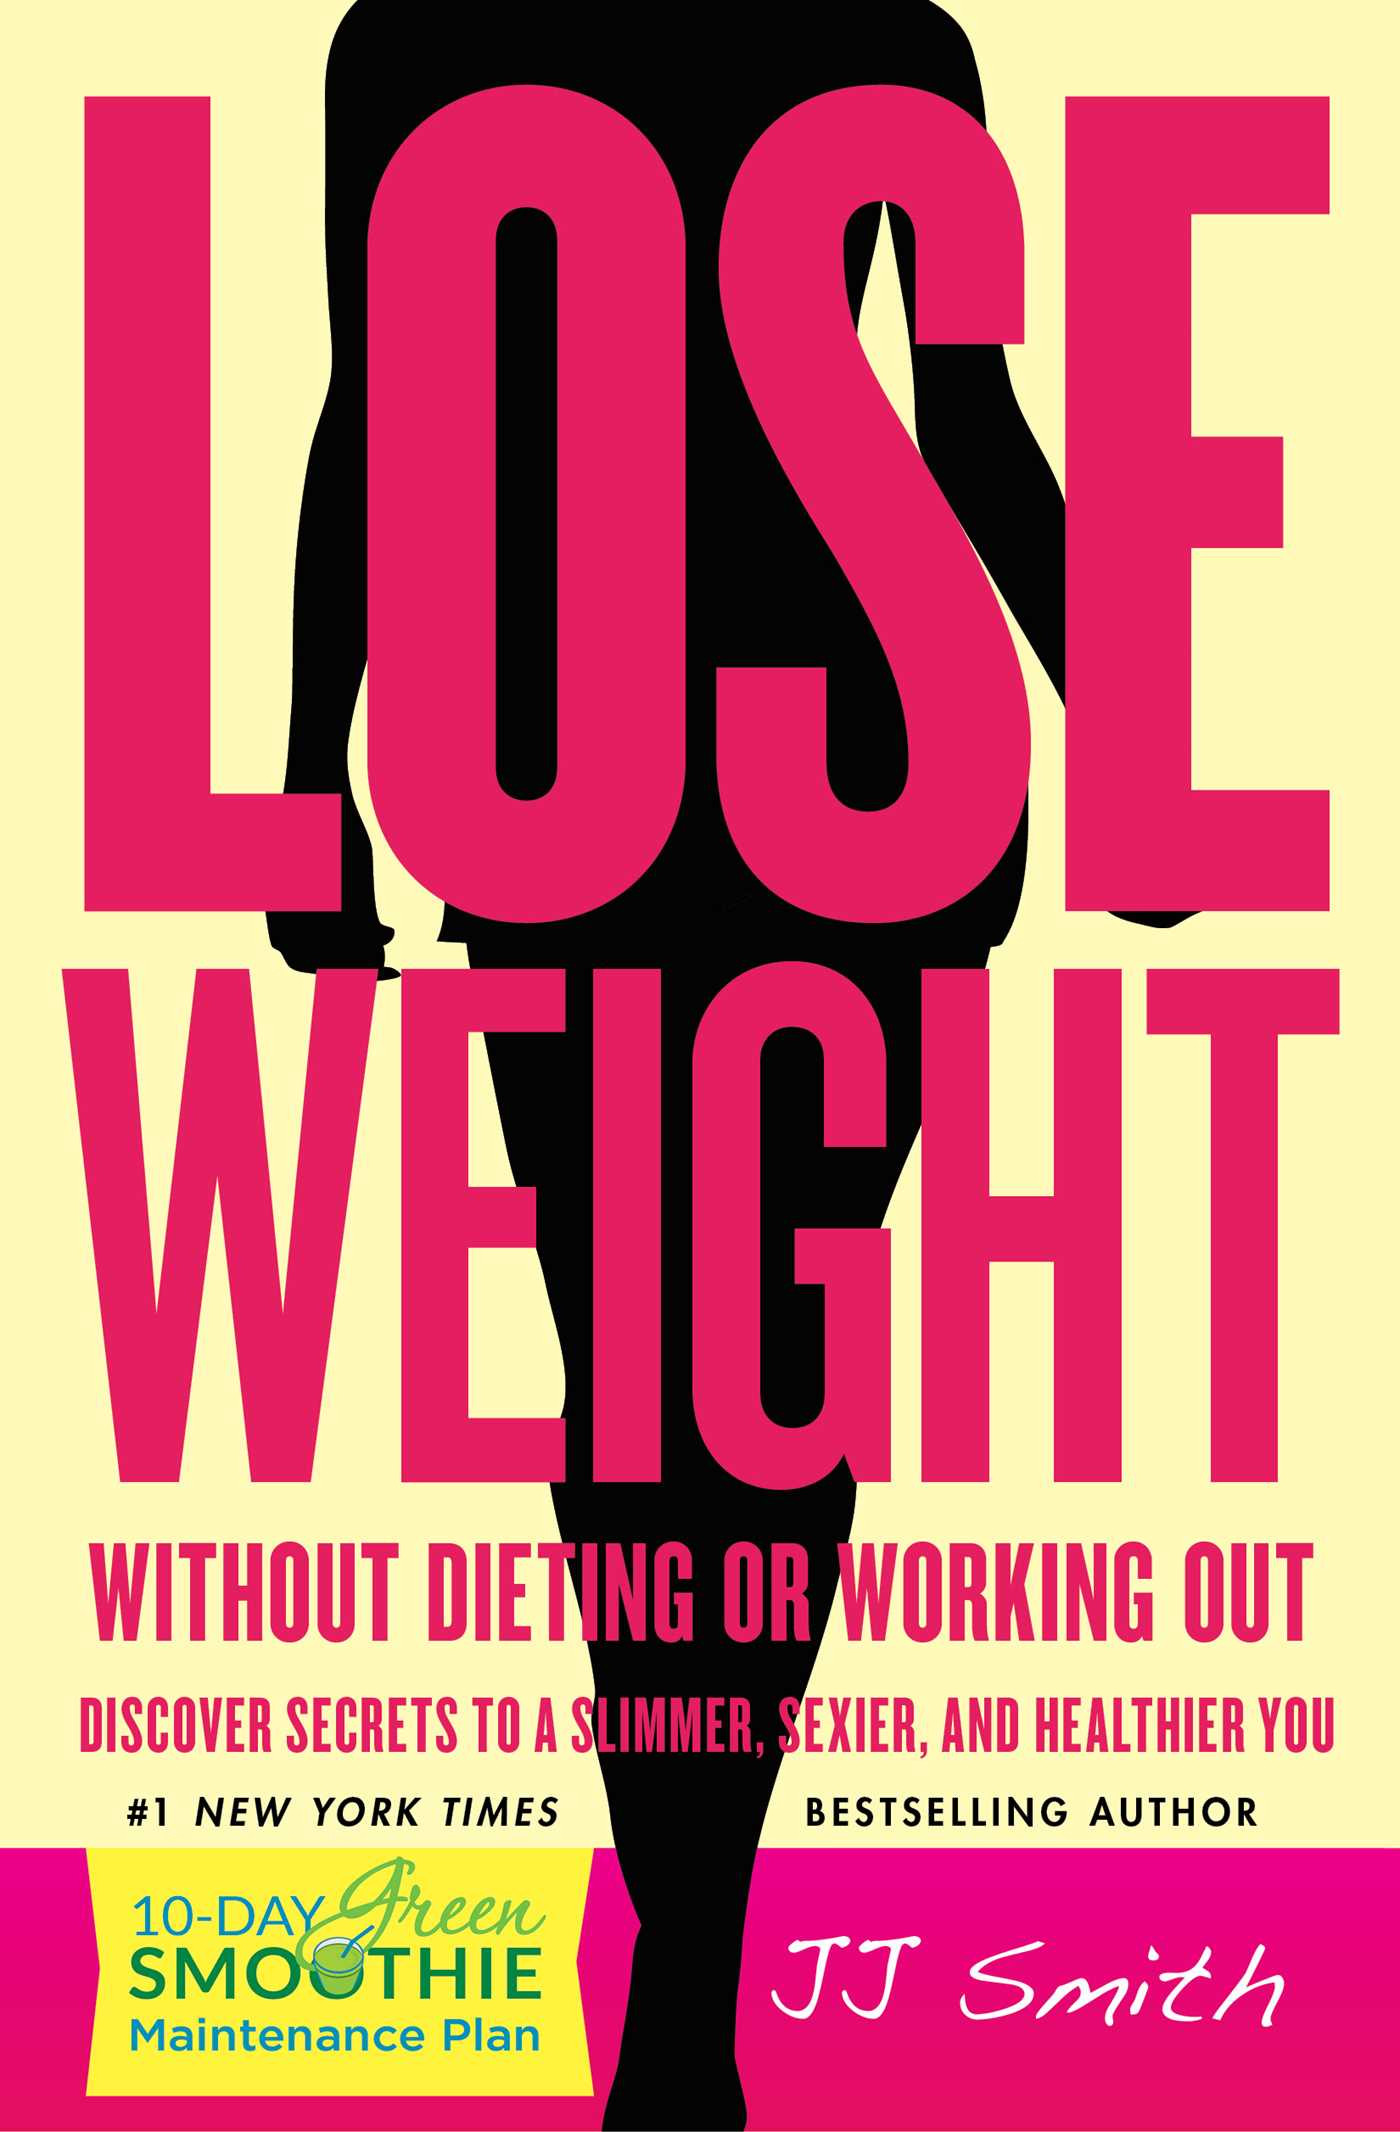 How To Lose Weight Without Working Out
 Lose Weight Without Dieting or Working Out